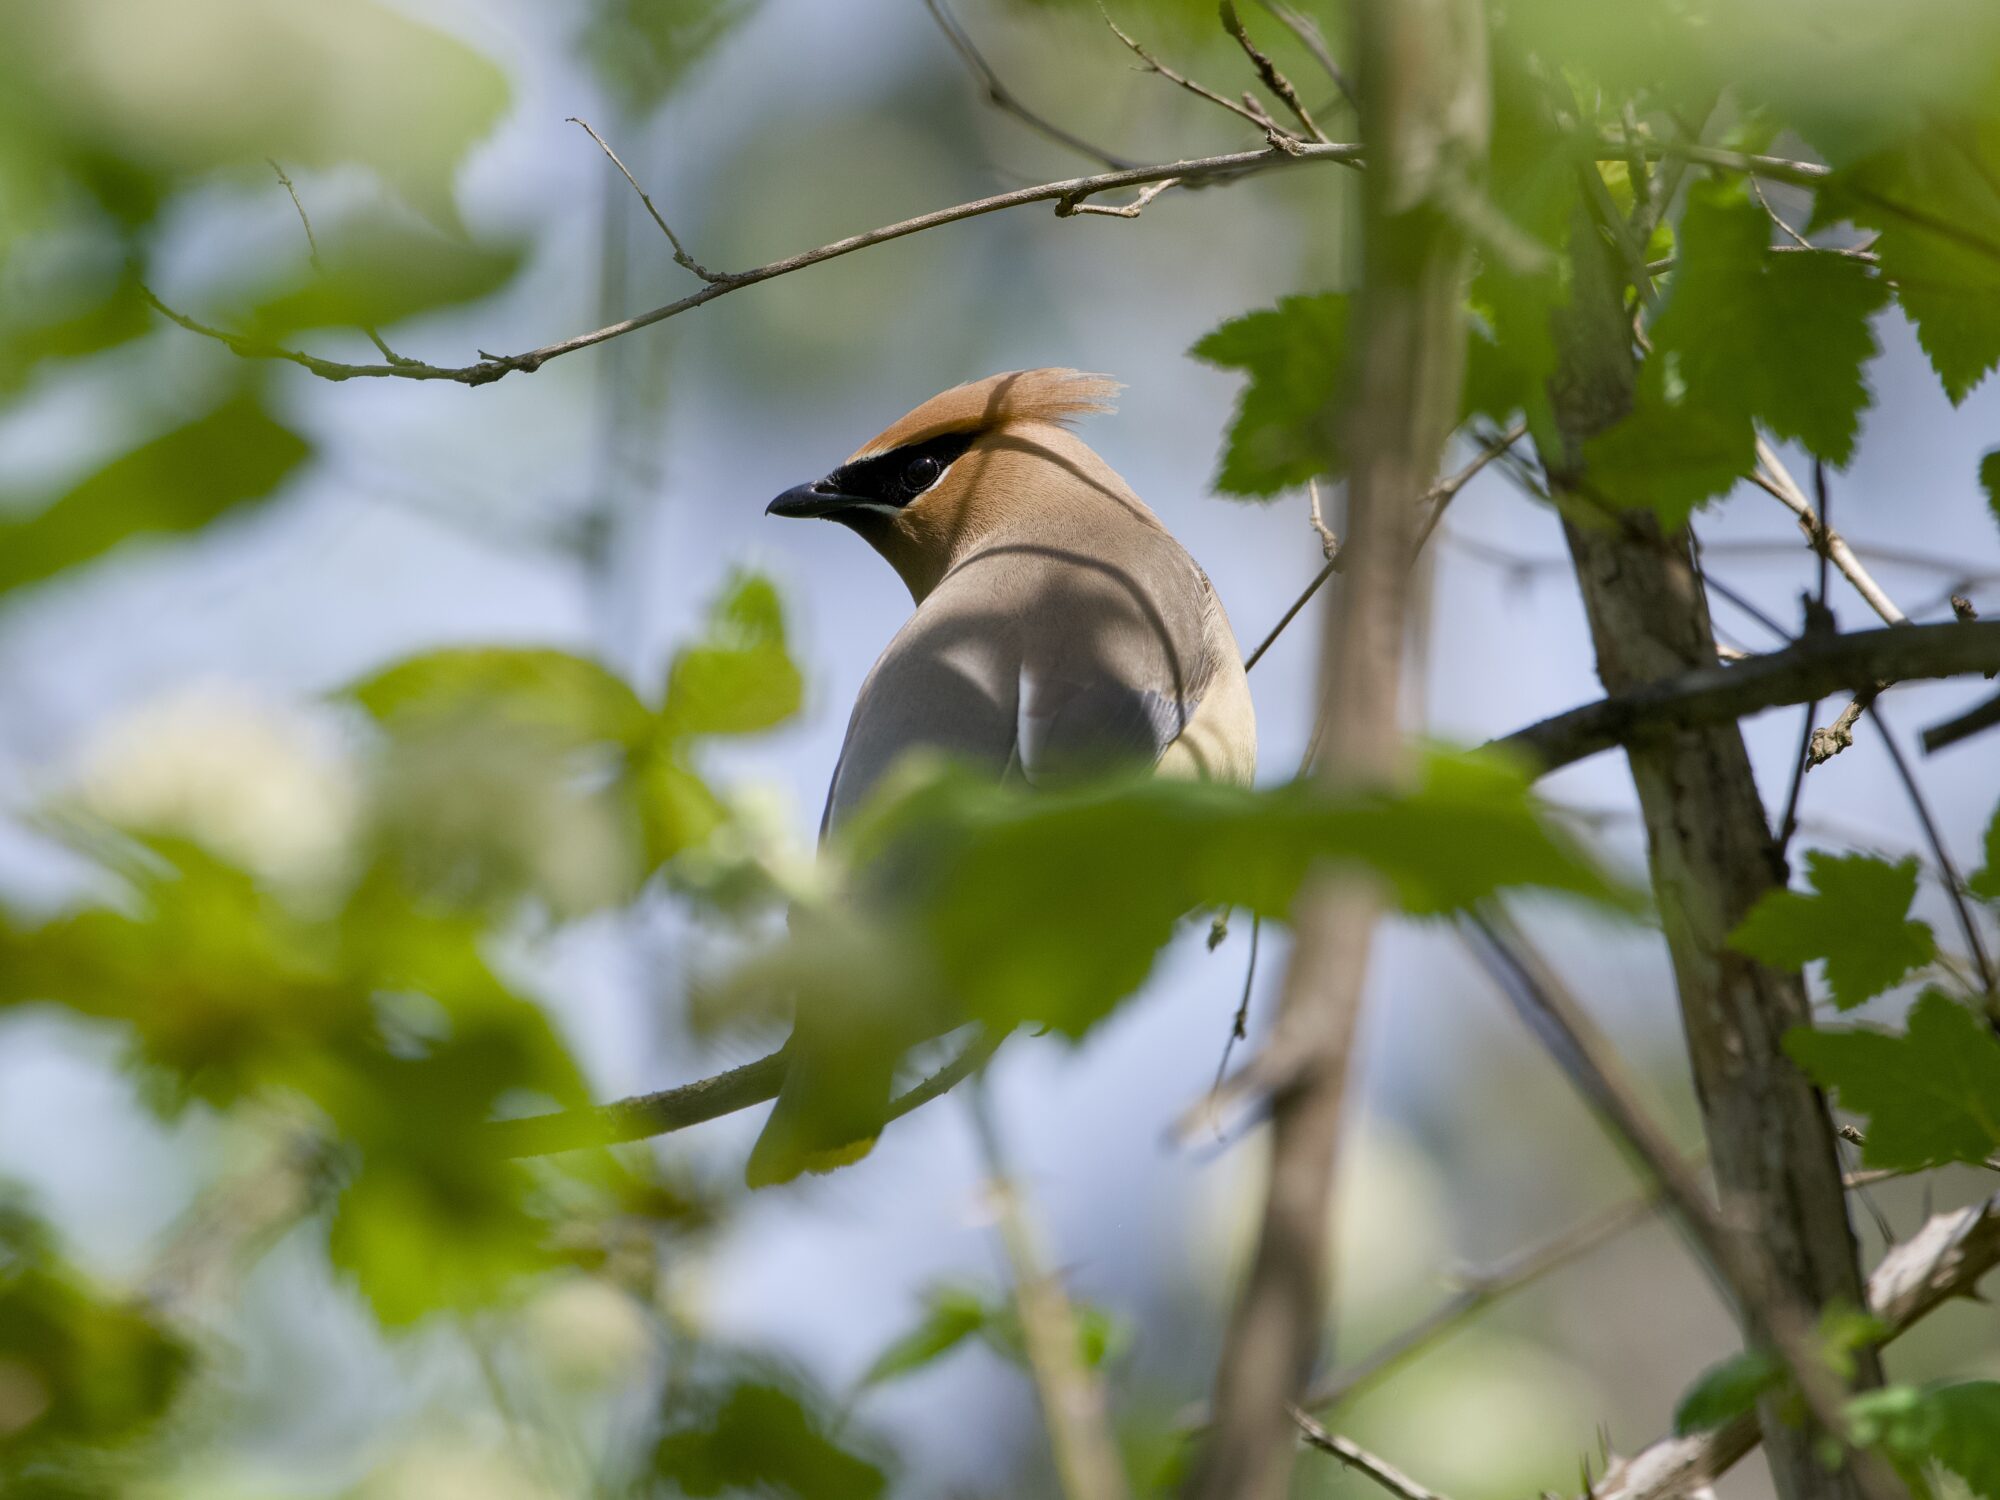 A Cedar Waxwing up in a tree, partly obscured by the foliage. Its back is to us, but it is turning its head so we see its pretty face